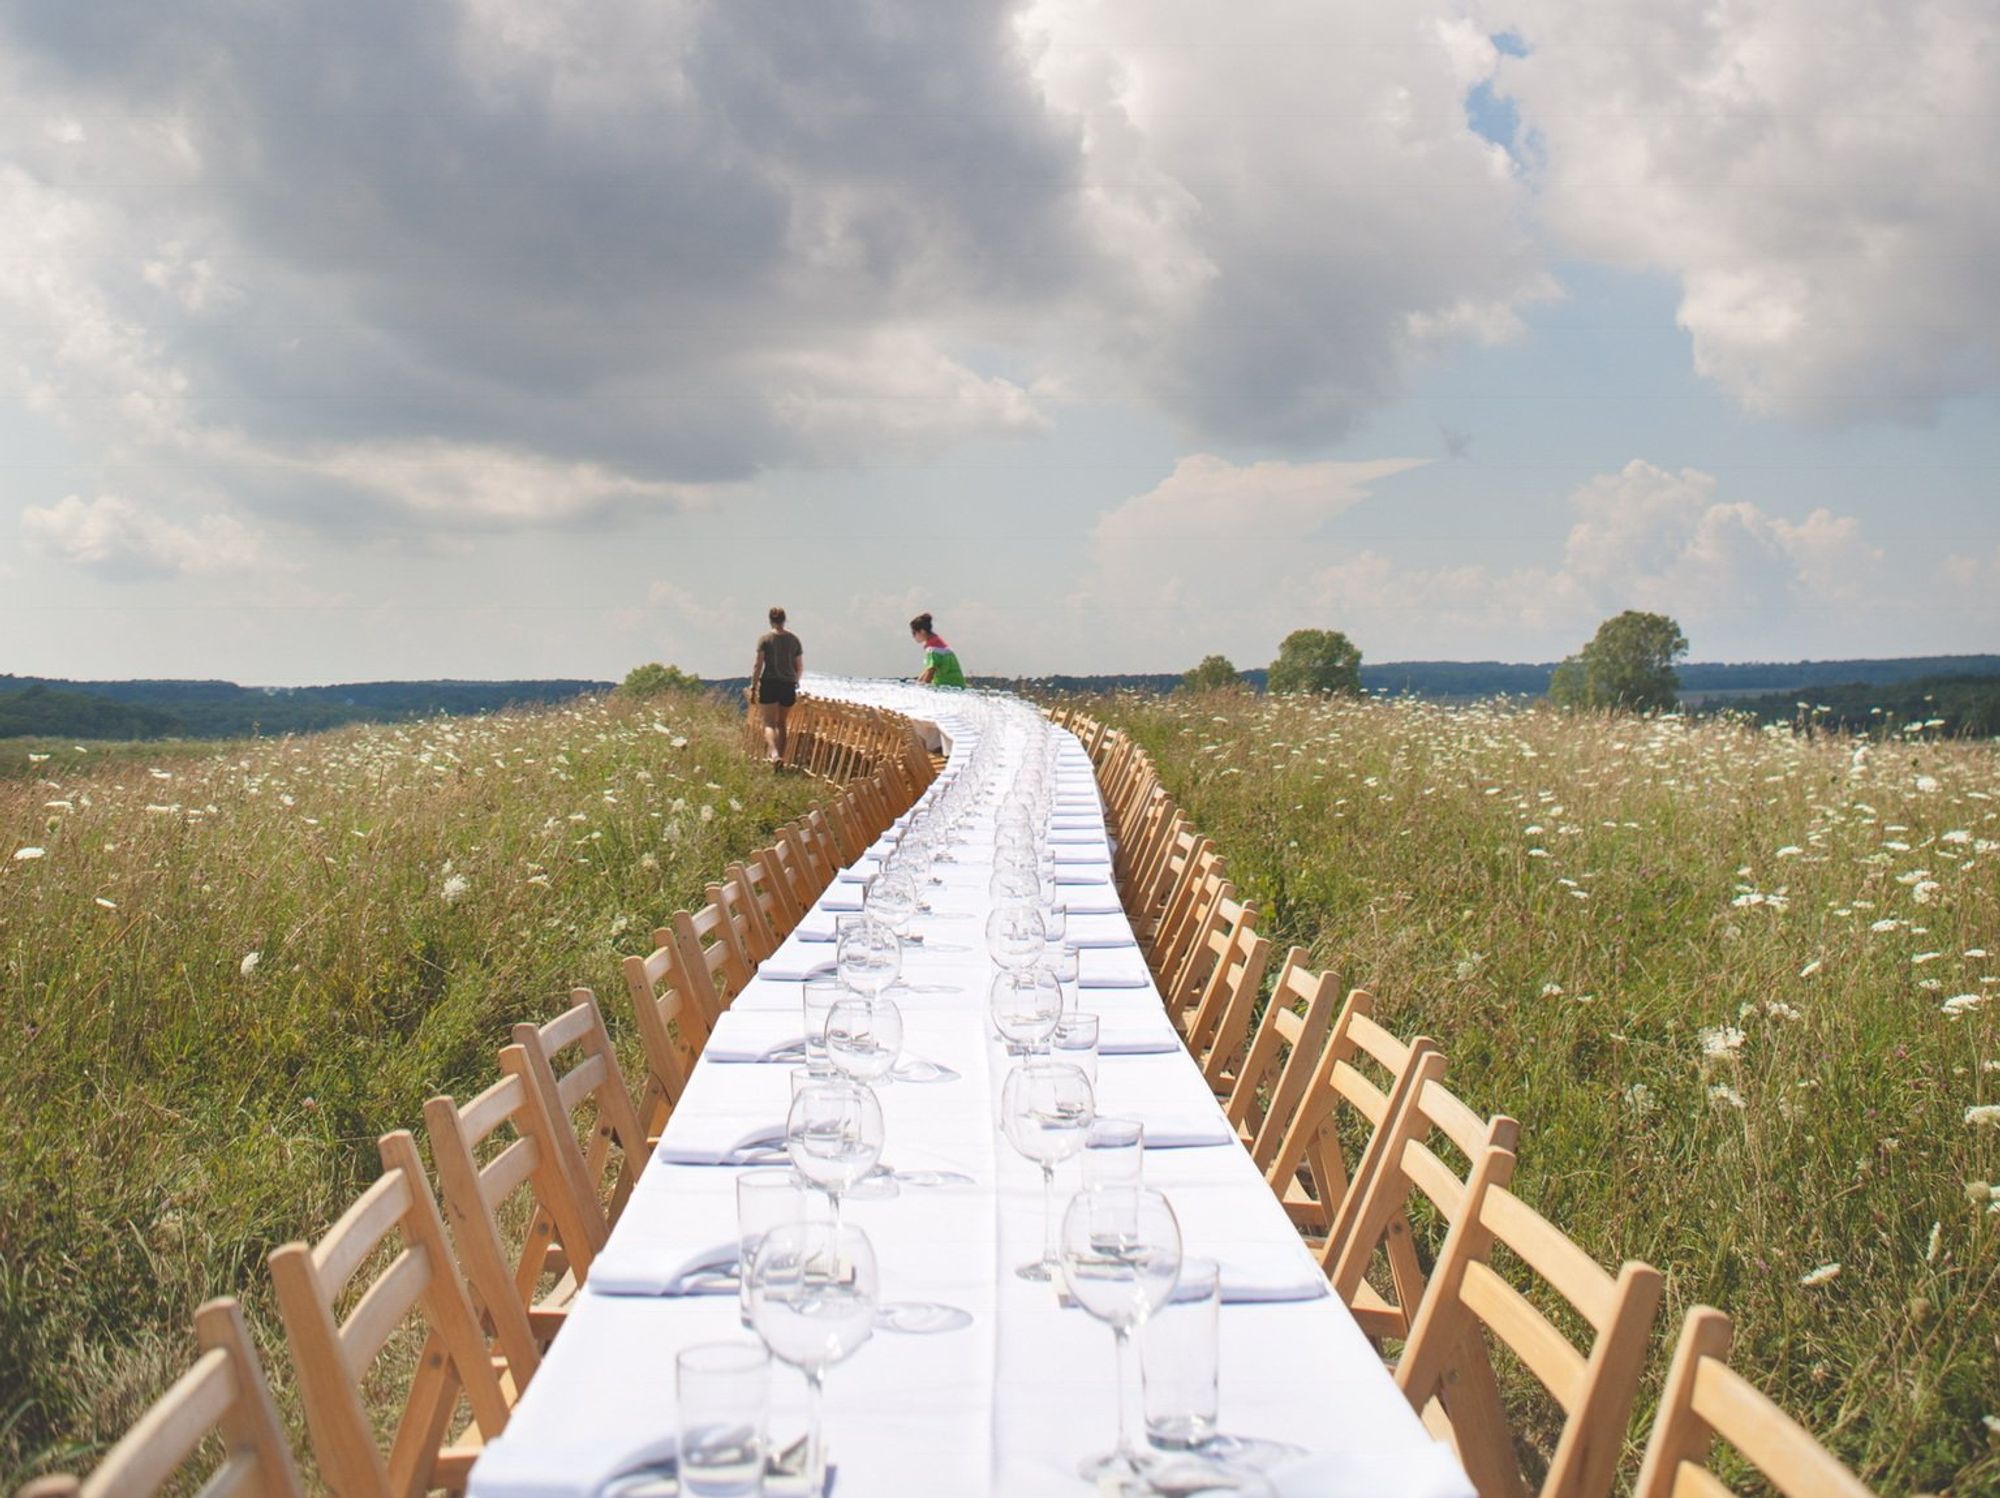 Outstanding in the Field dinner series